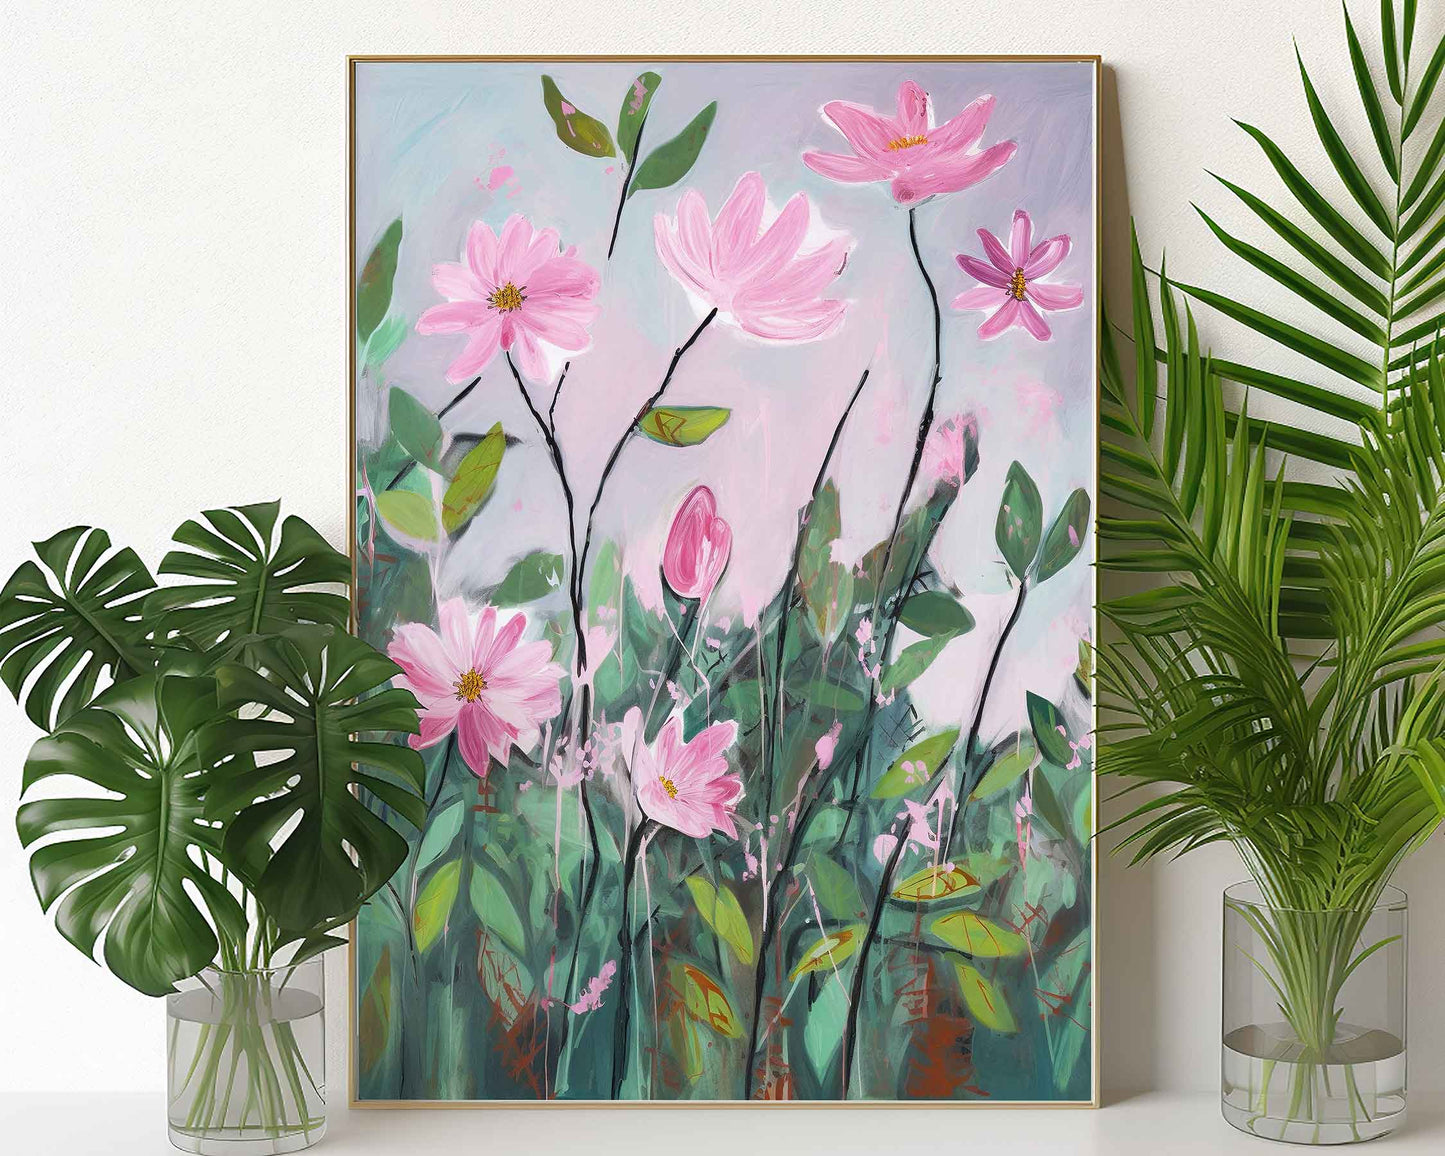 Framed Image of Vintage Pink Flowers Abstract Oil Paintings Wall Art Poster Print Gift